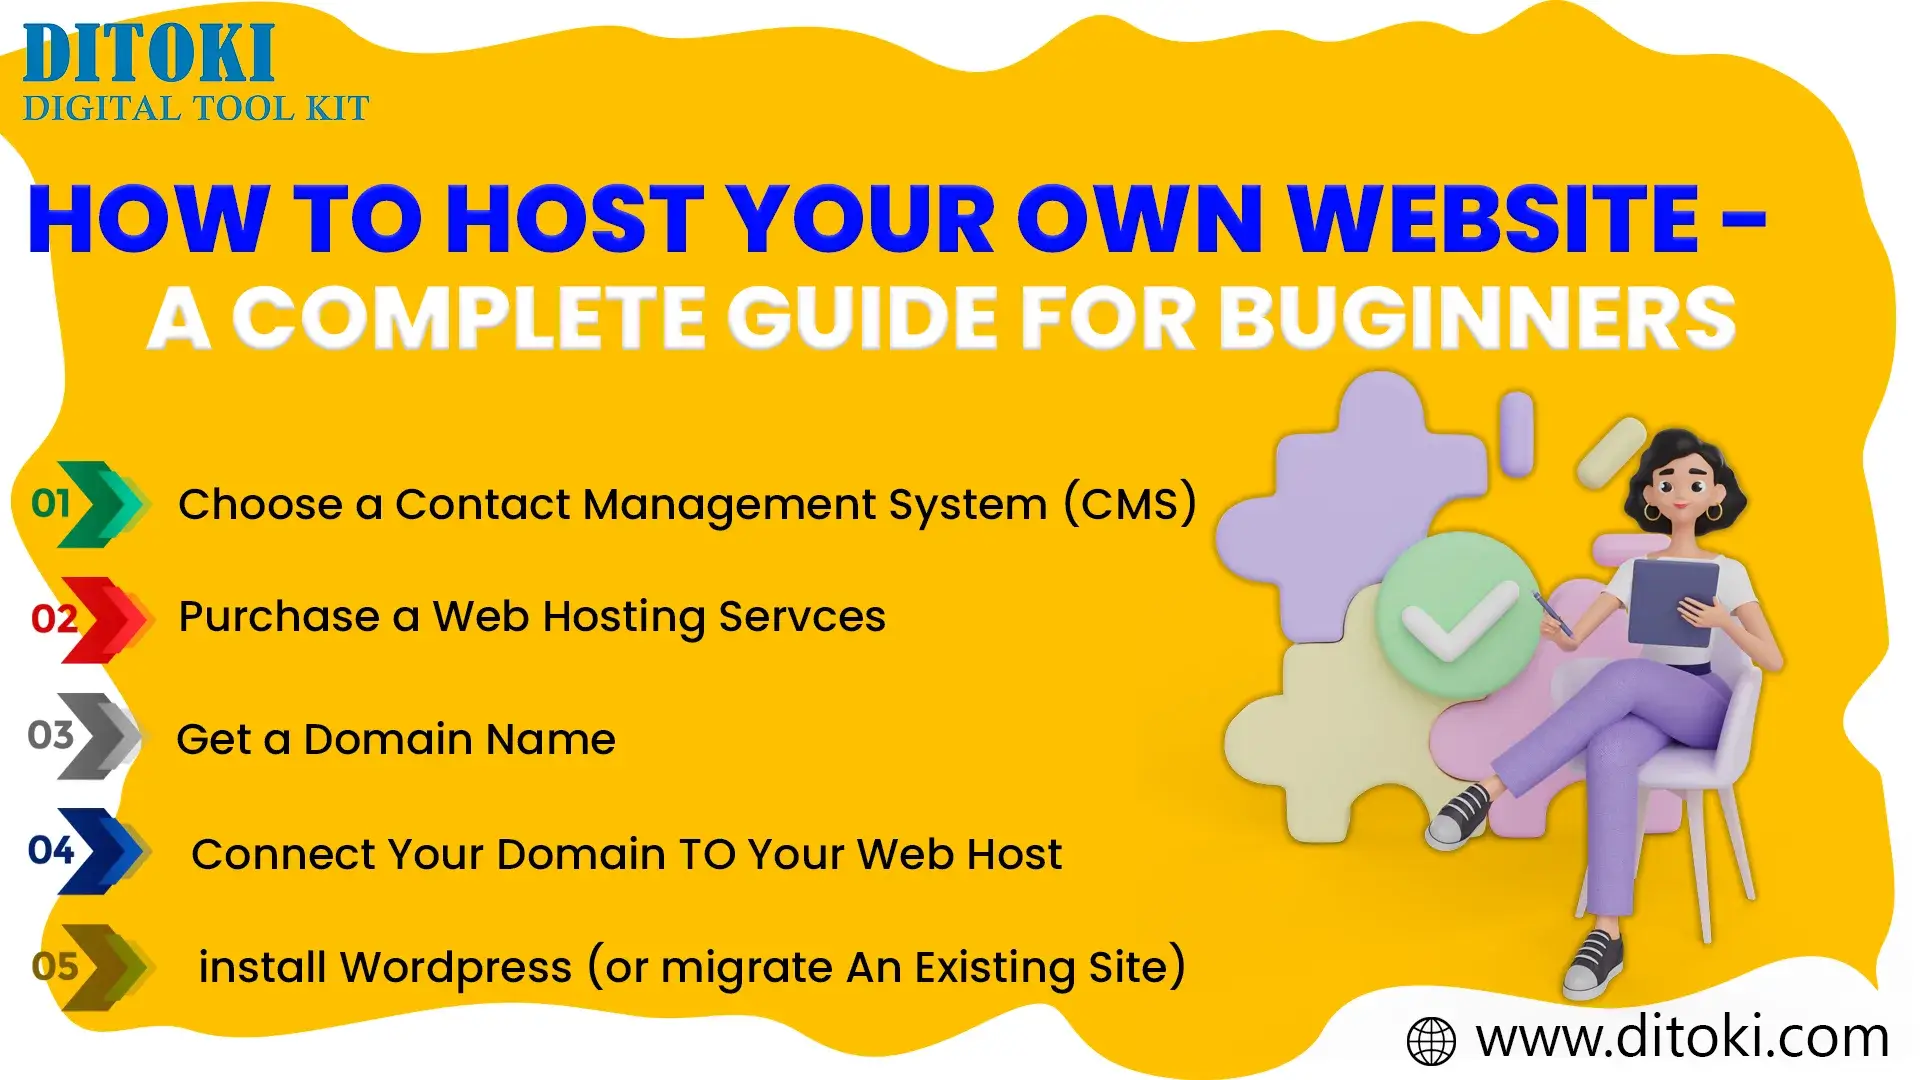 HOW TO HOST A WEBSITE ON YOUR OWN